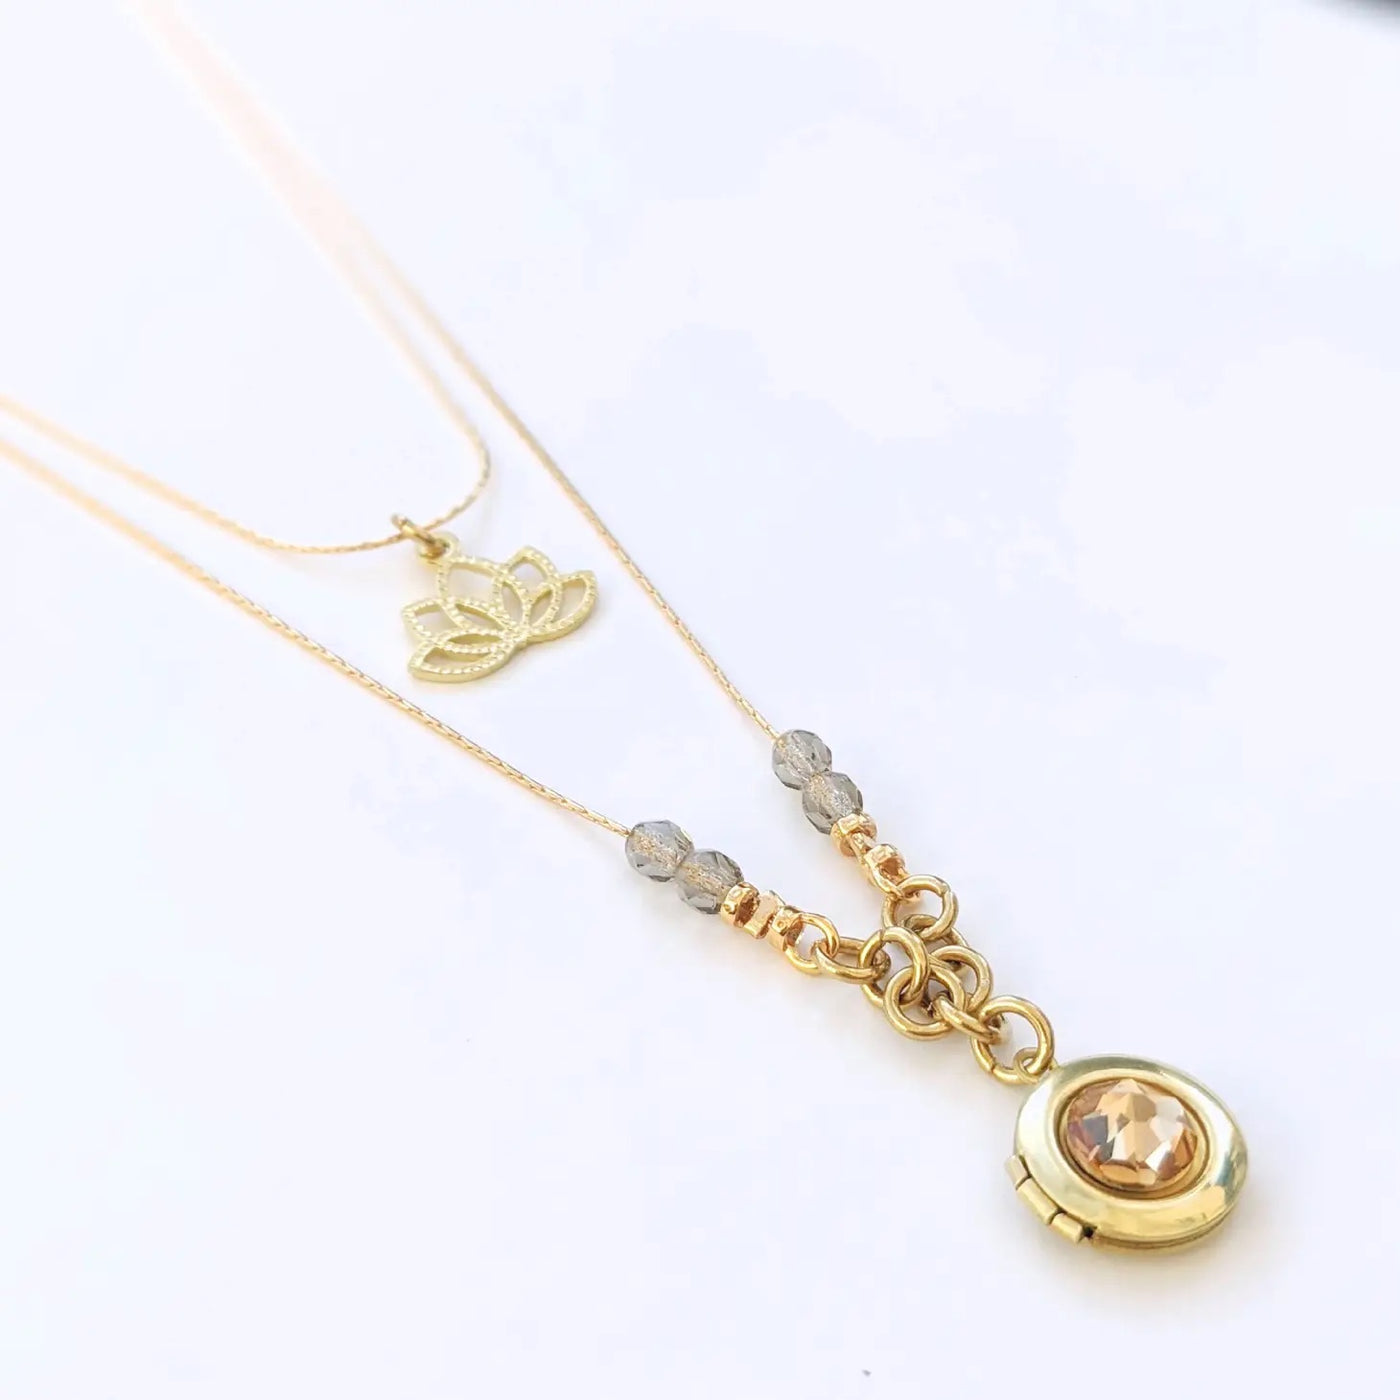 Ginger Lilly 2 strand Layered Locket Necklace